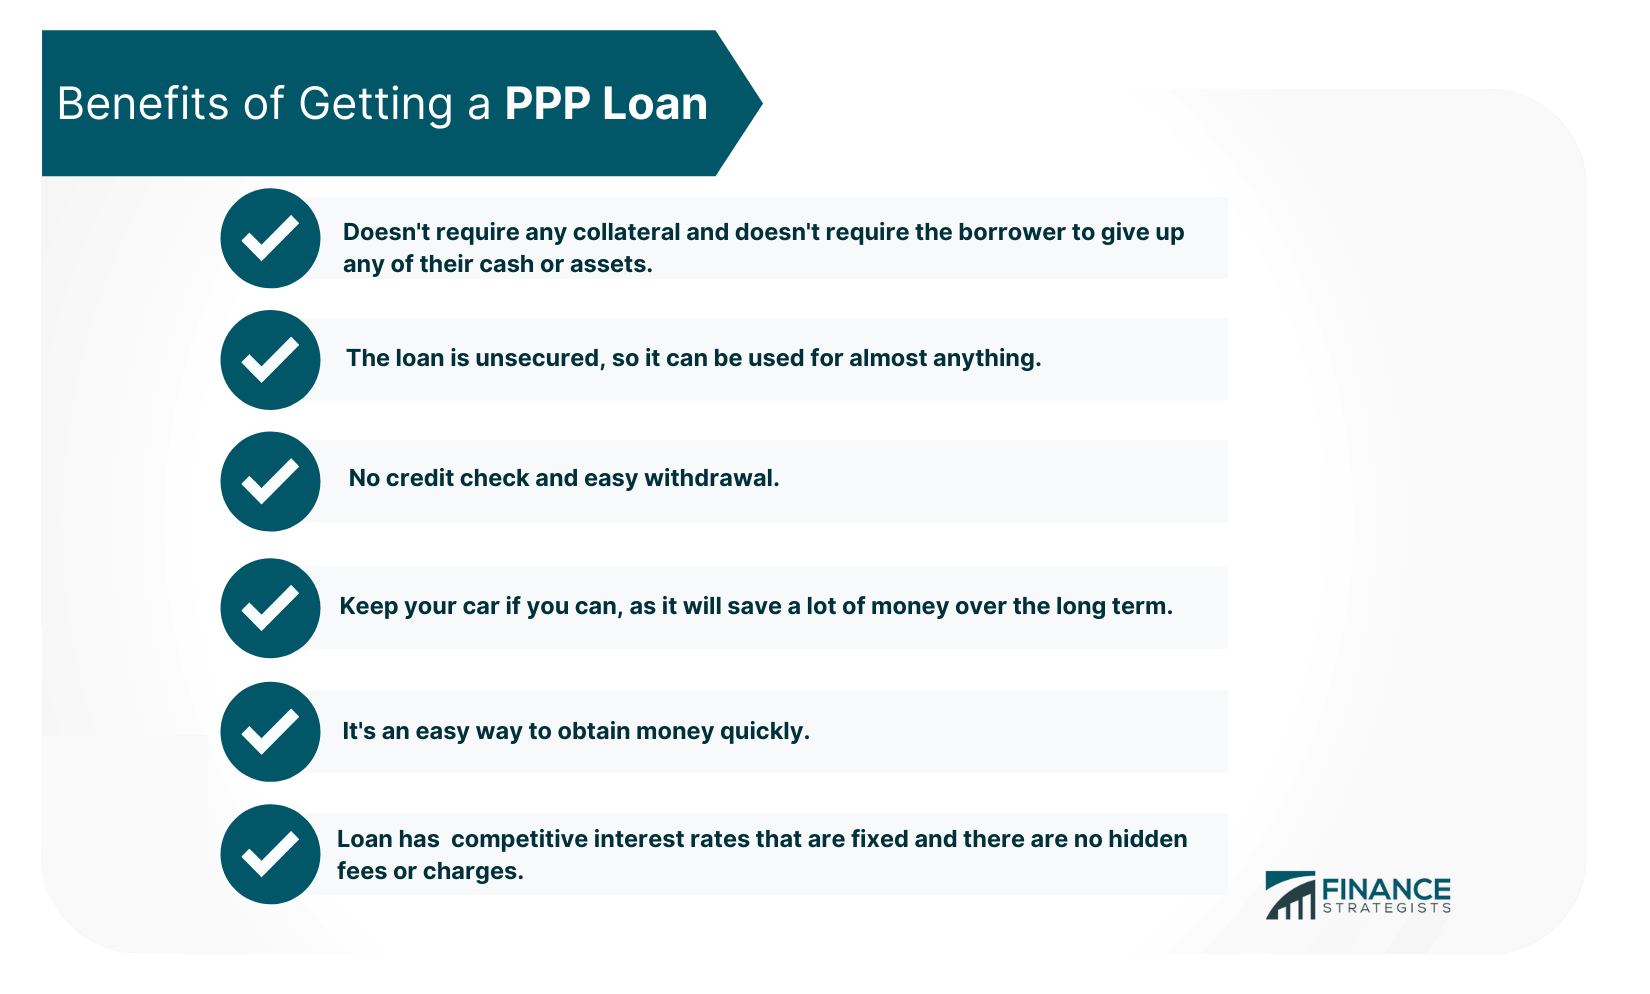 Benefits_of_Getting_a_PPP_Loan